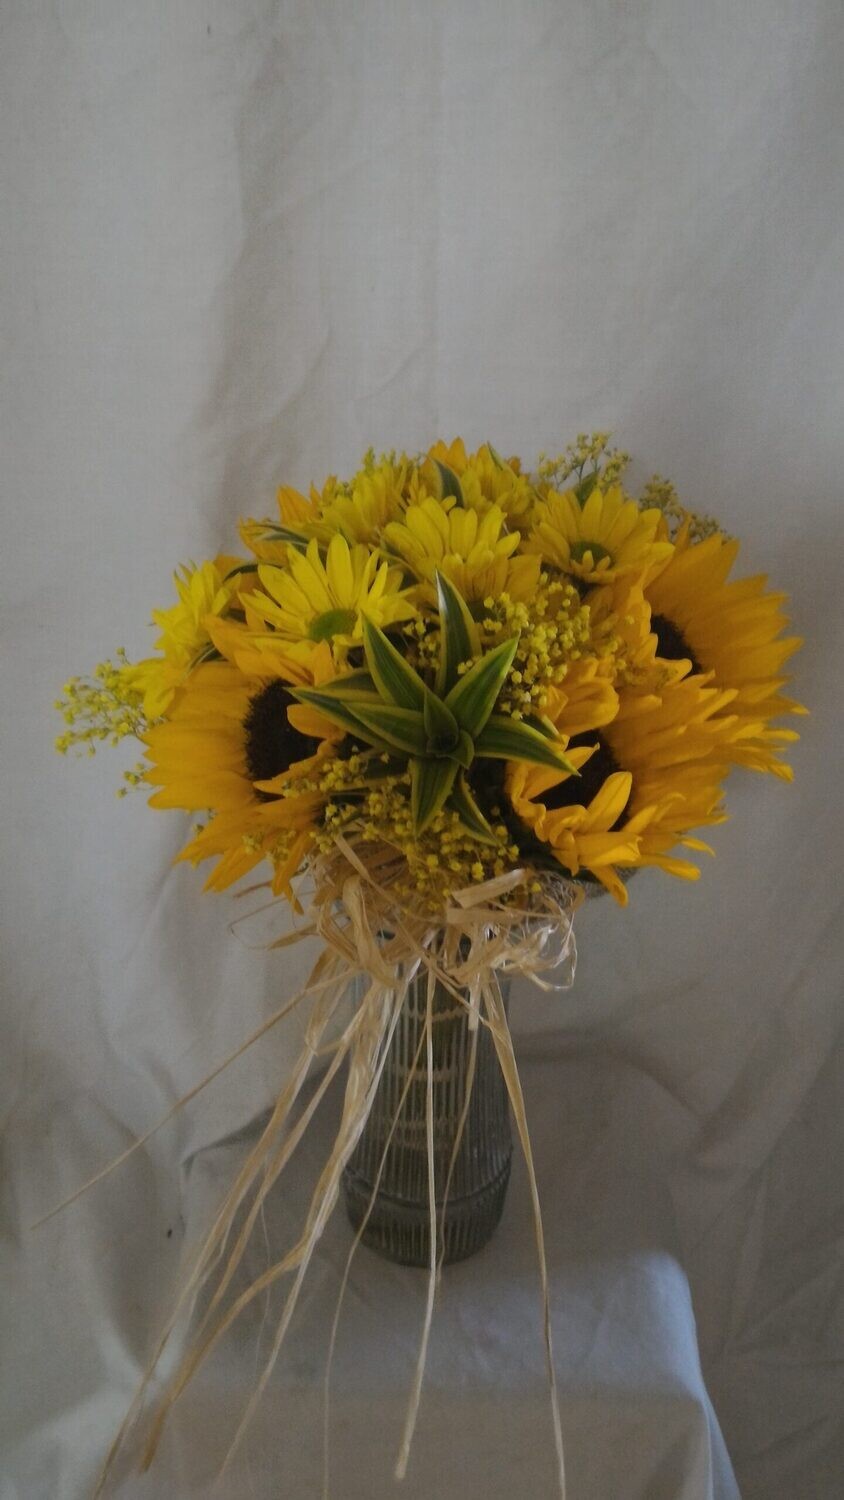 Mix cut flowers with Sun flowers